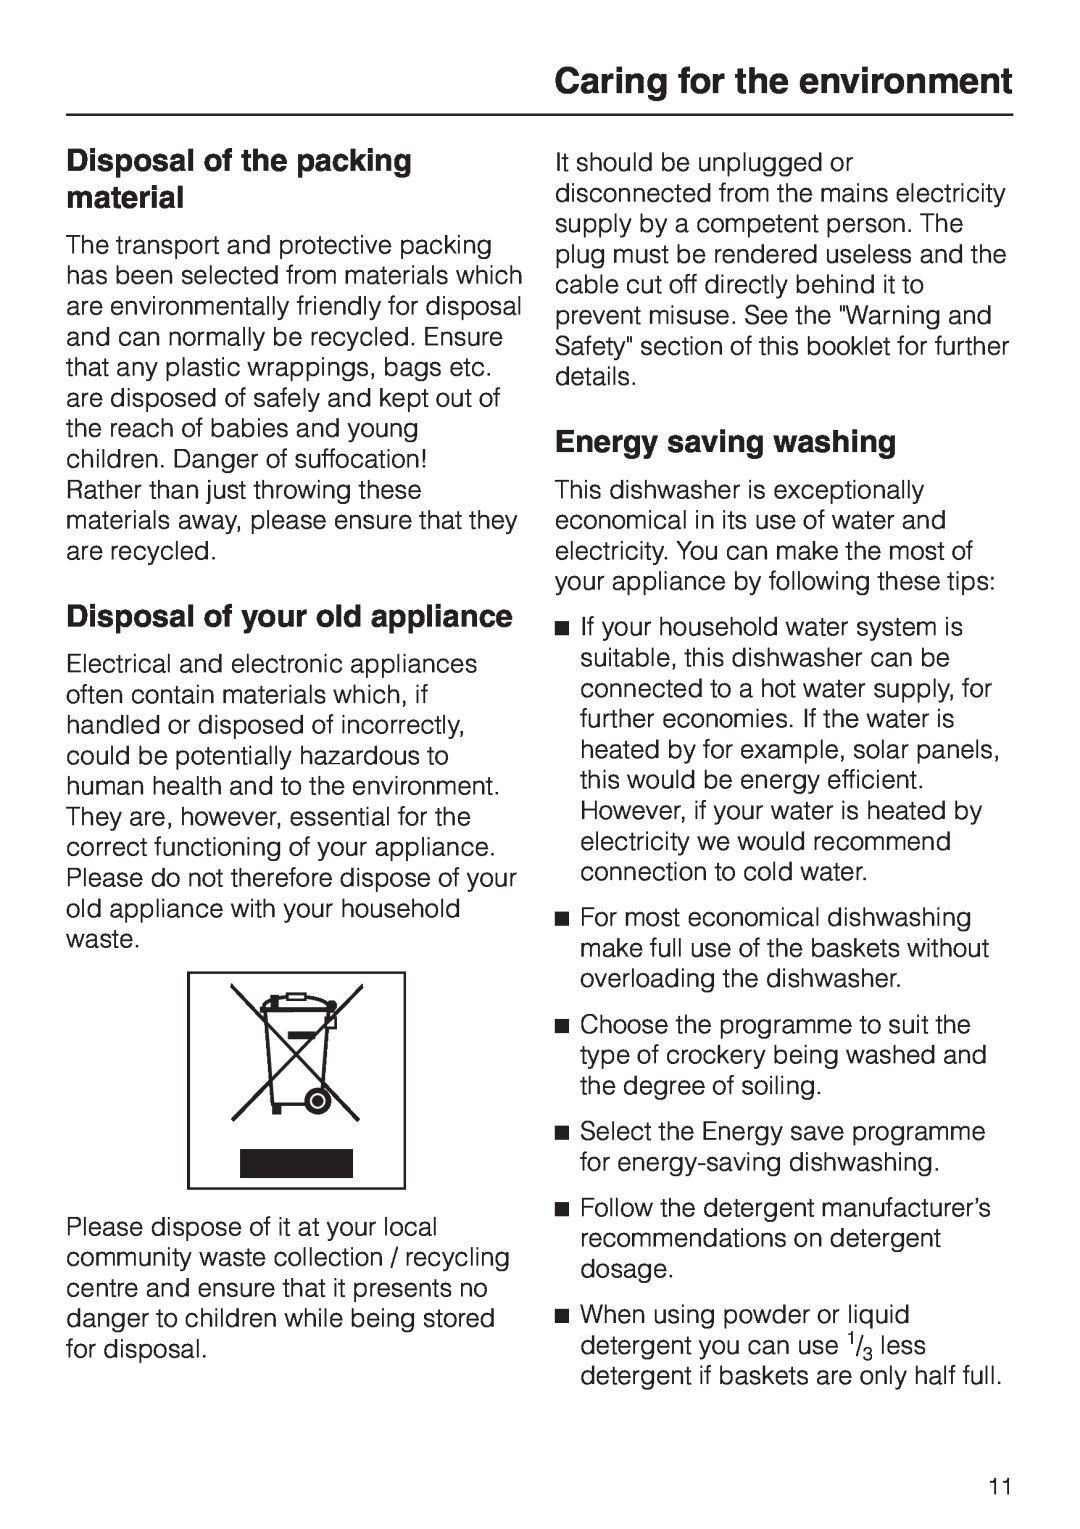 Miele 06 702 810 manual Caring for the environment, Disposal of the packing material, Energy saving washing 